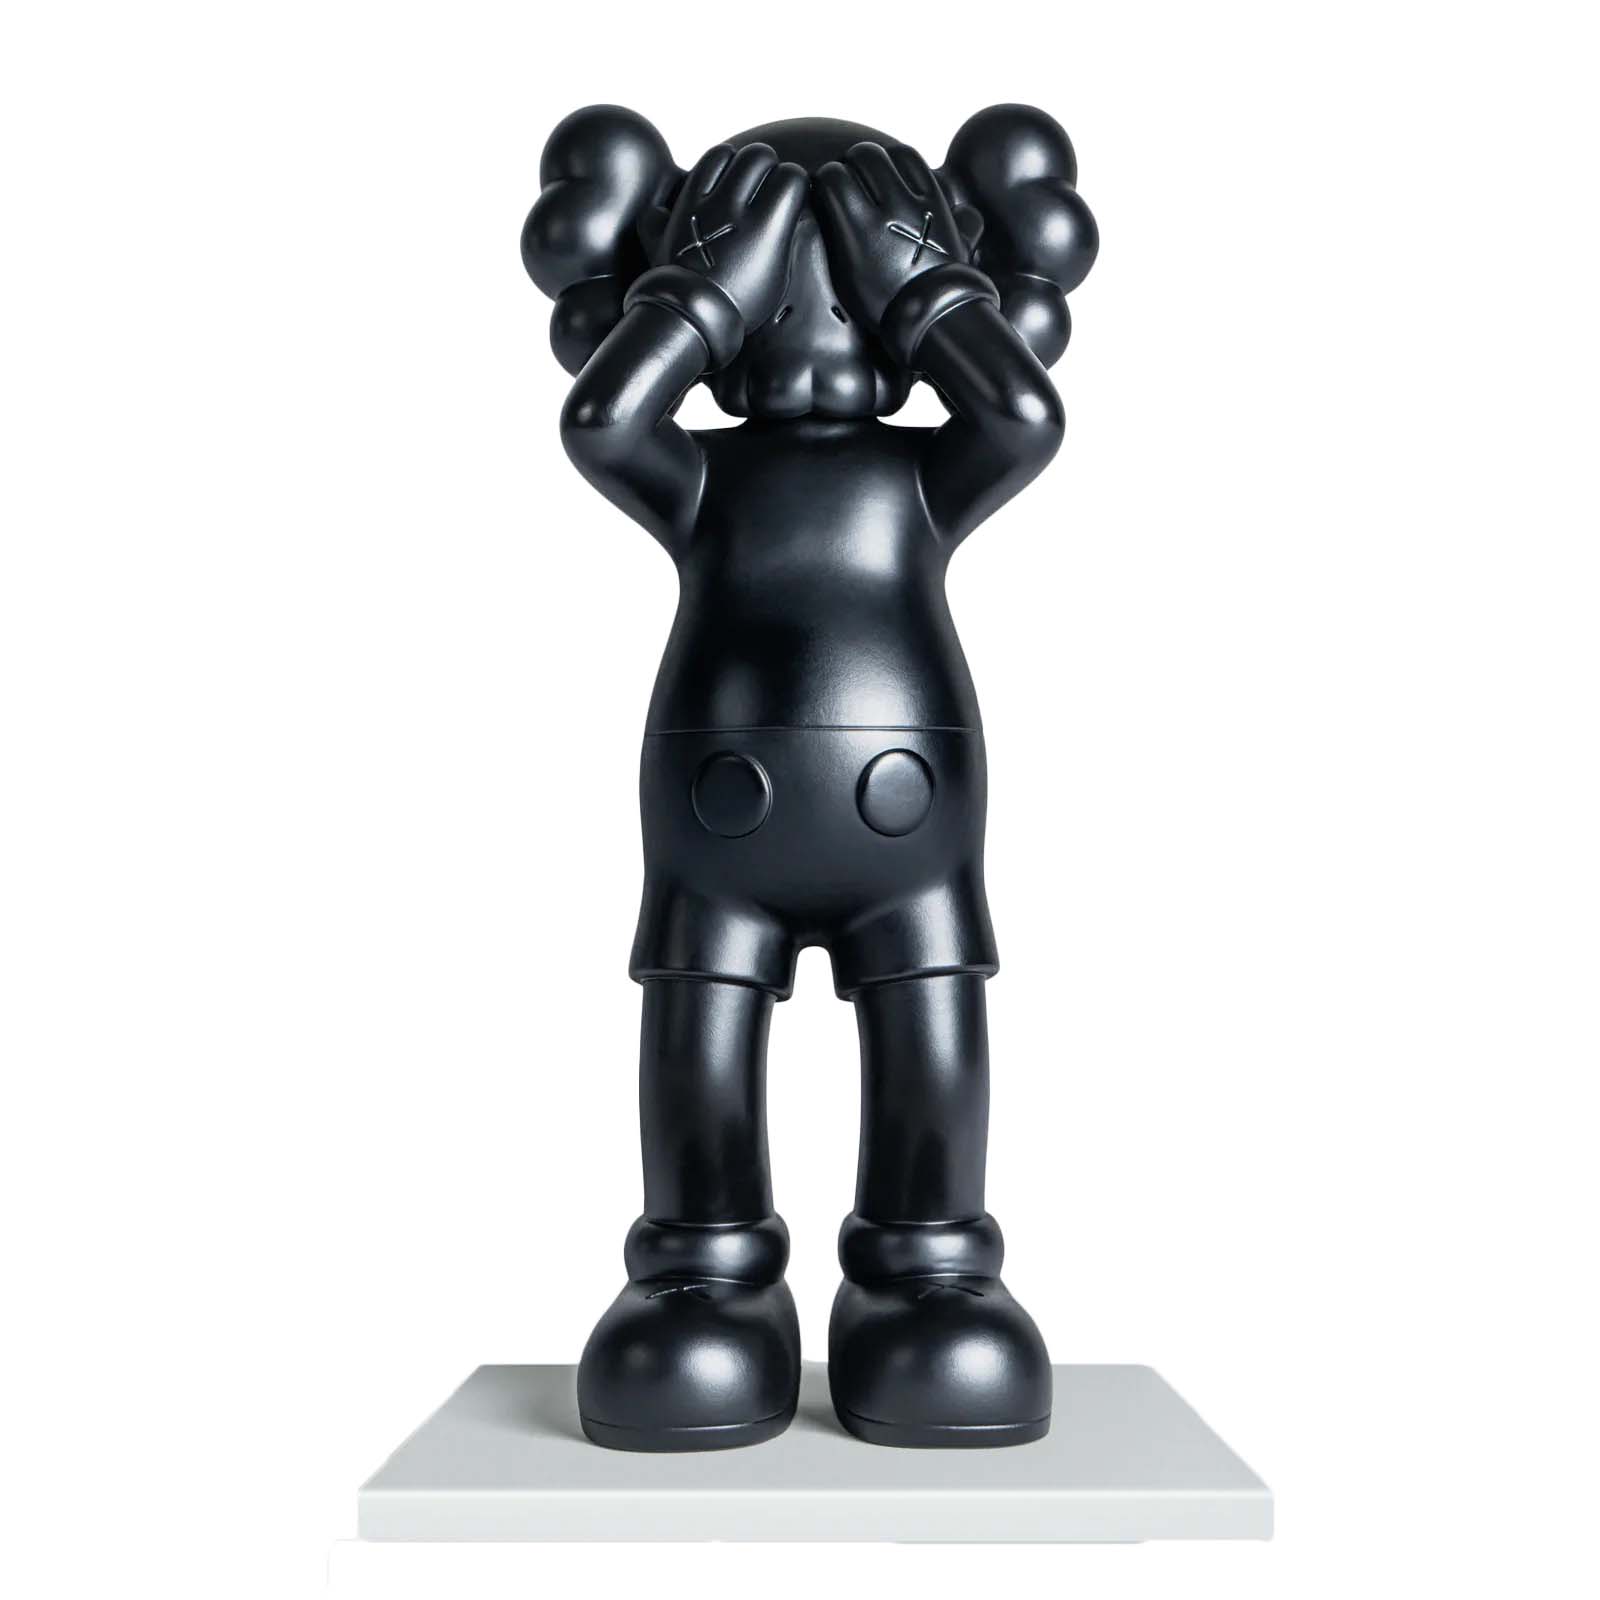 KAWS At This Time Bronze Figure (Edition of 250 + 50 AP, with 